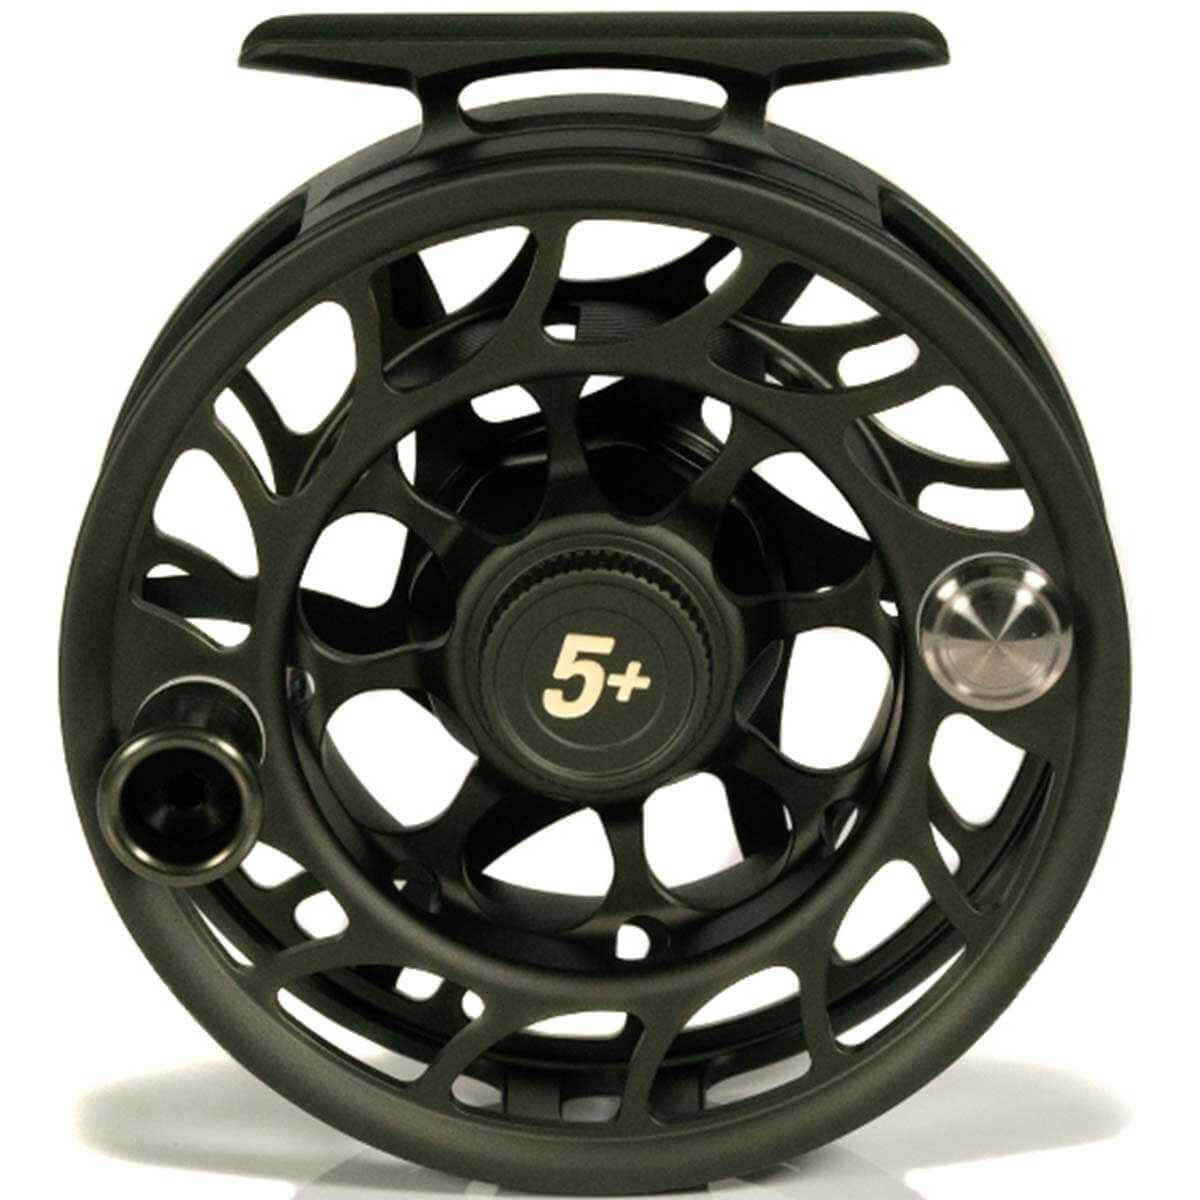 Compleat Gear Review: The Hatch Iconic Fly Reel - The Compleat Angler